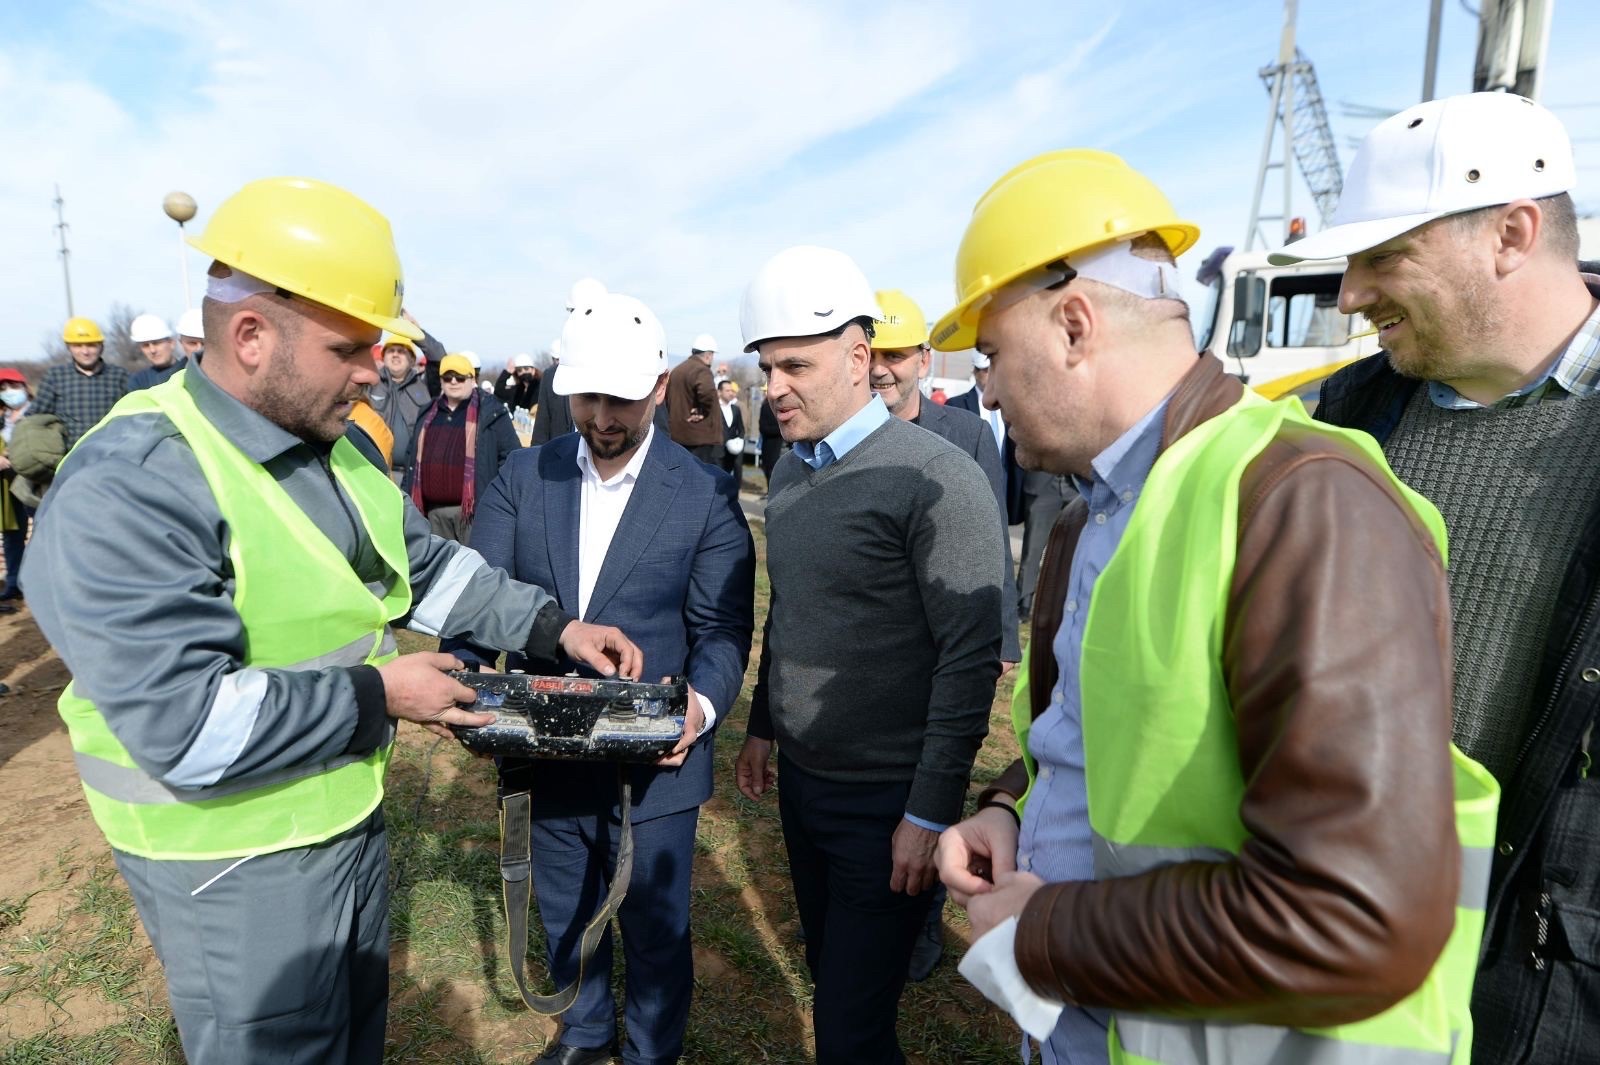 The region gets a new energy crossroad, the construction of the 400 kV interconnection Bitola – Elbasan has begun